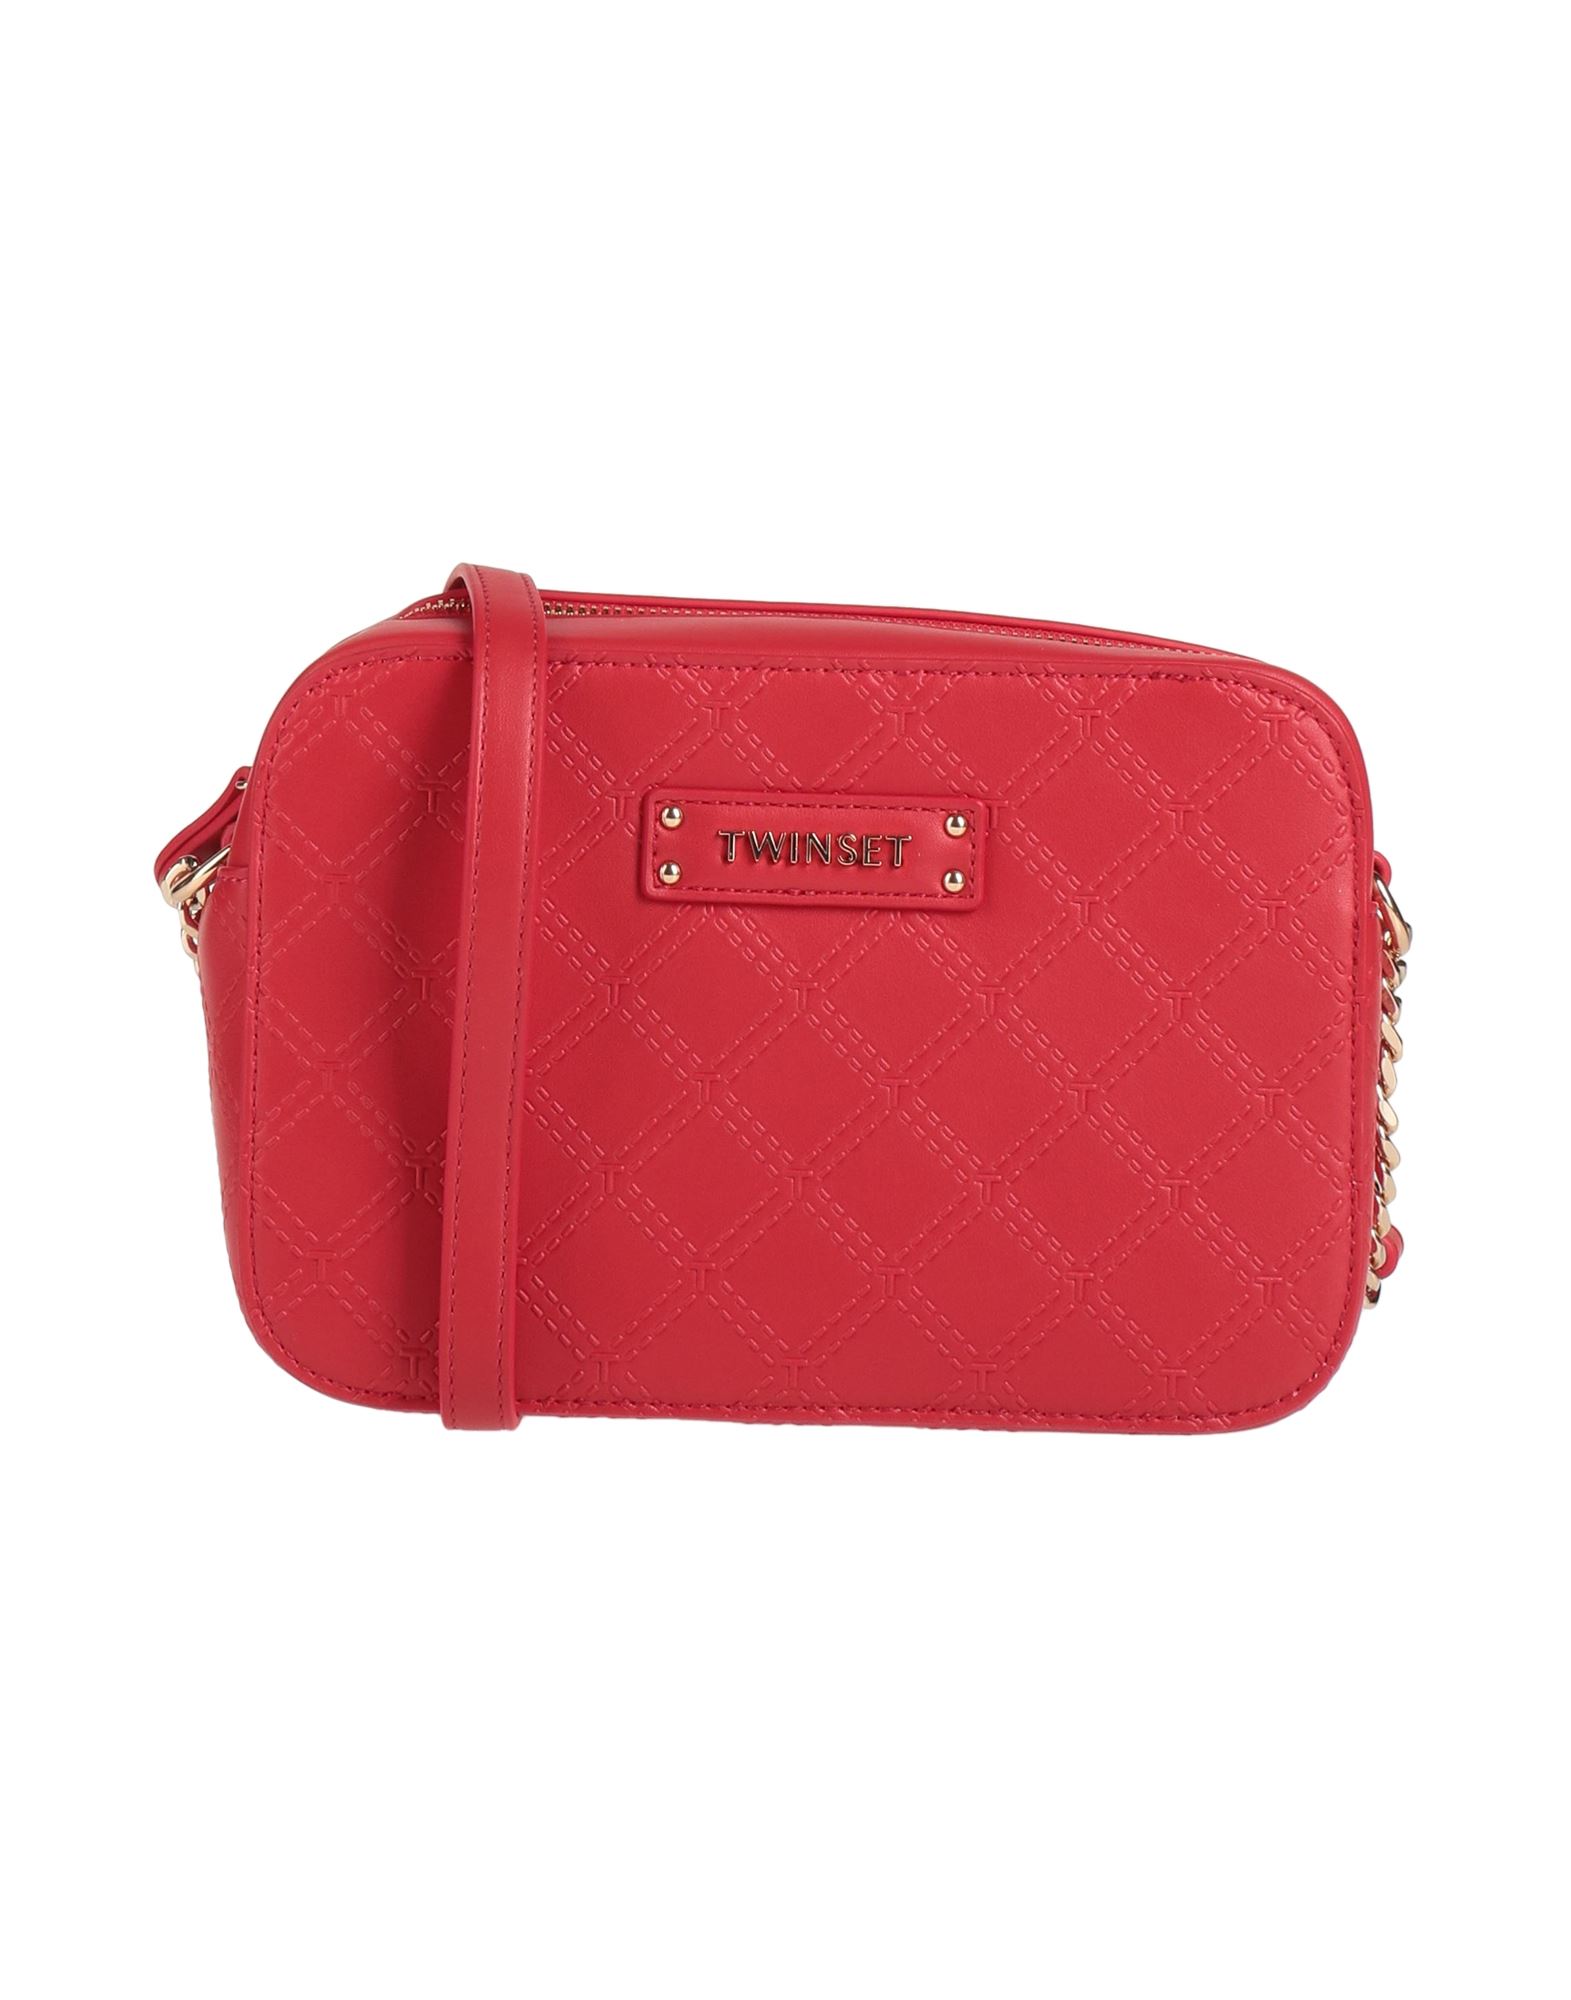 Twinset Handbags In Red